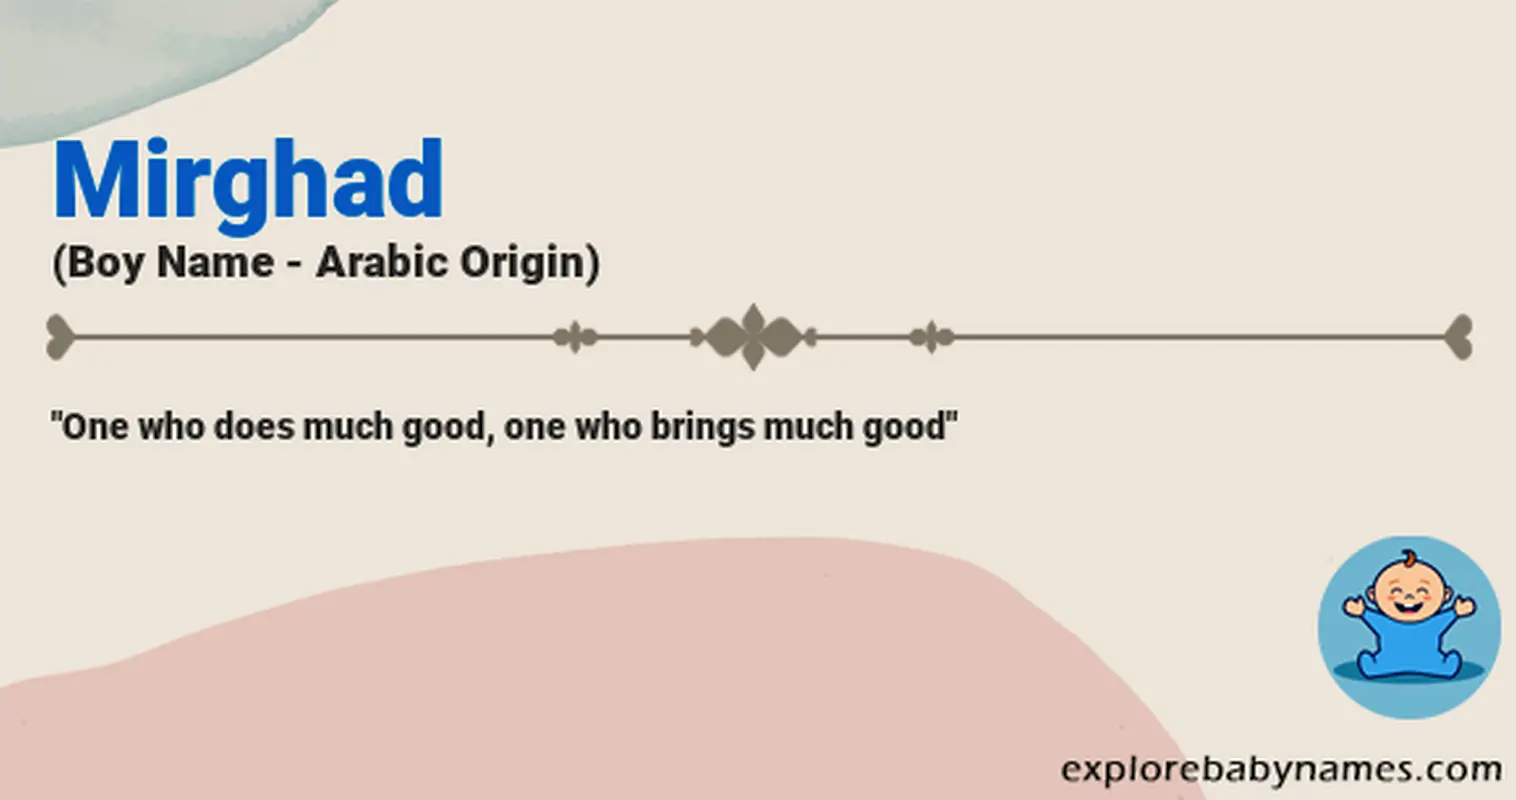 Meaning of Mirghad